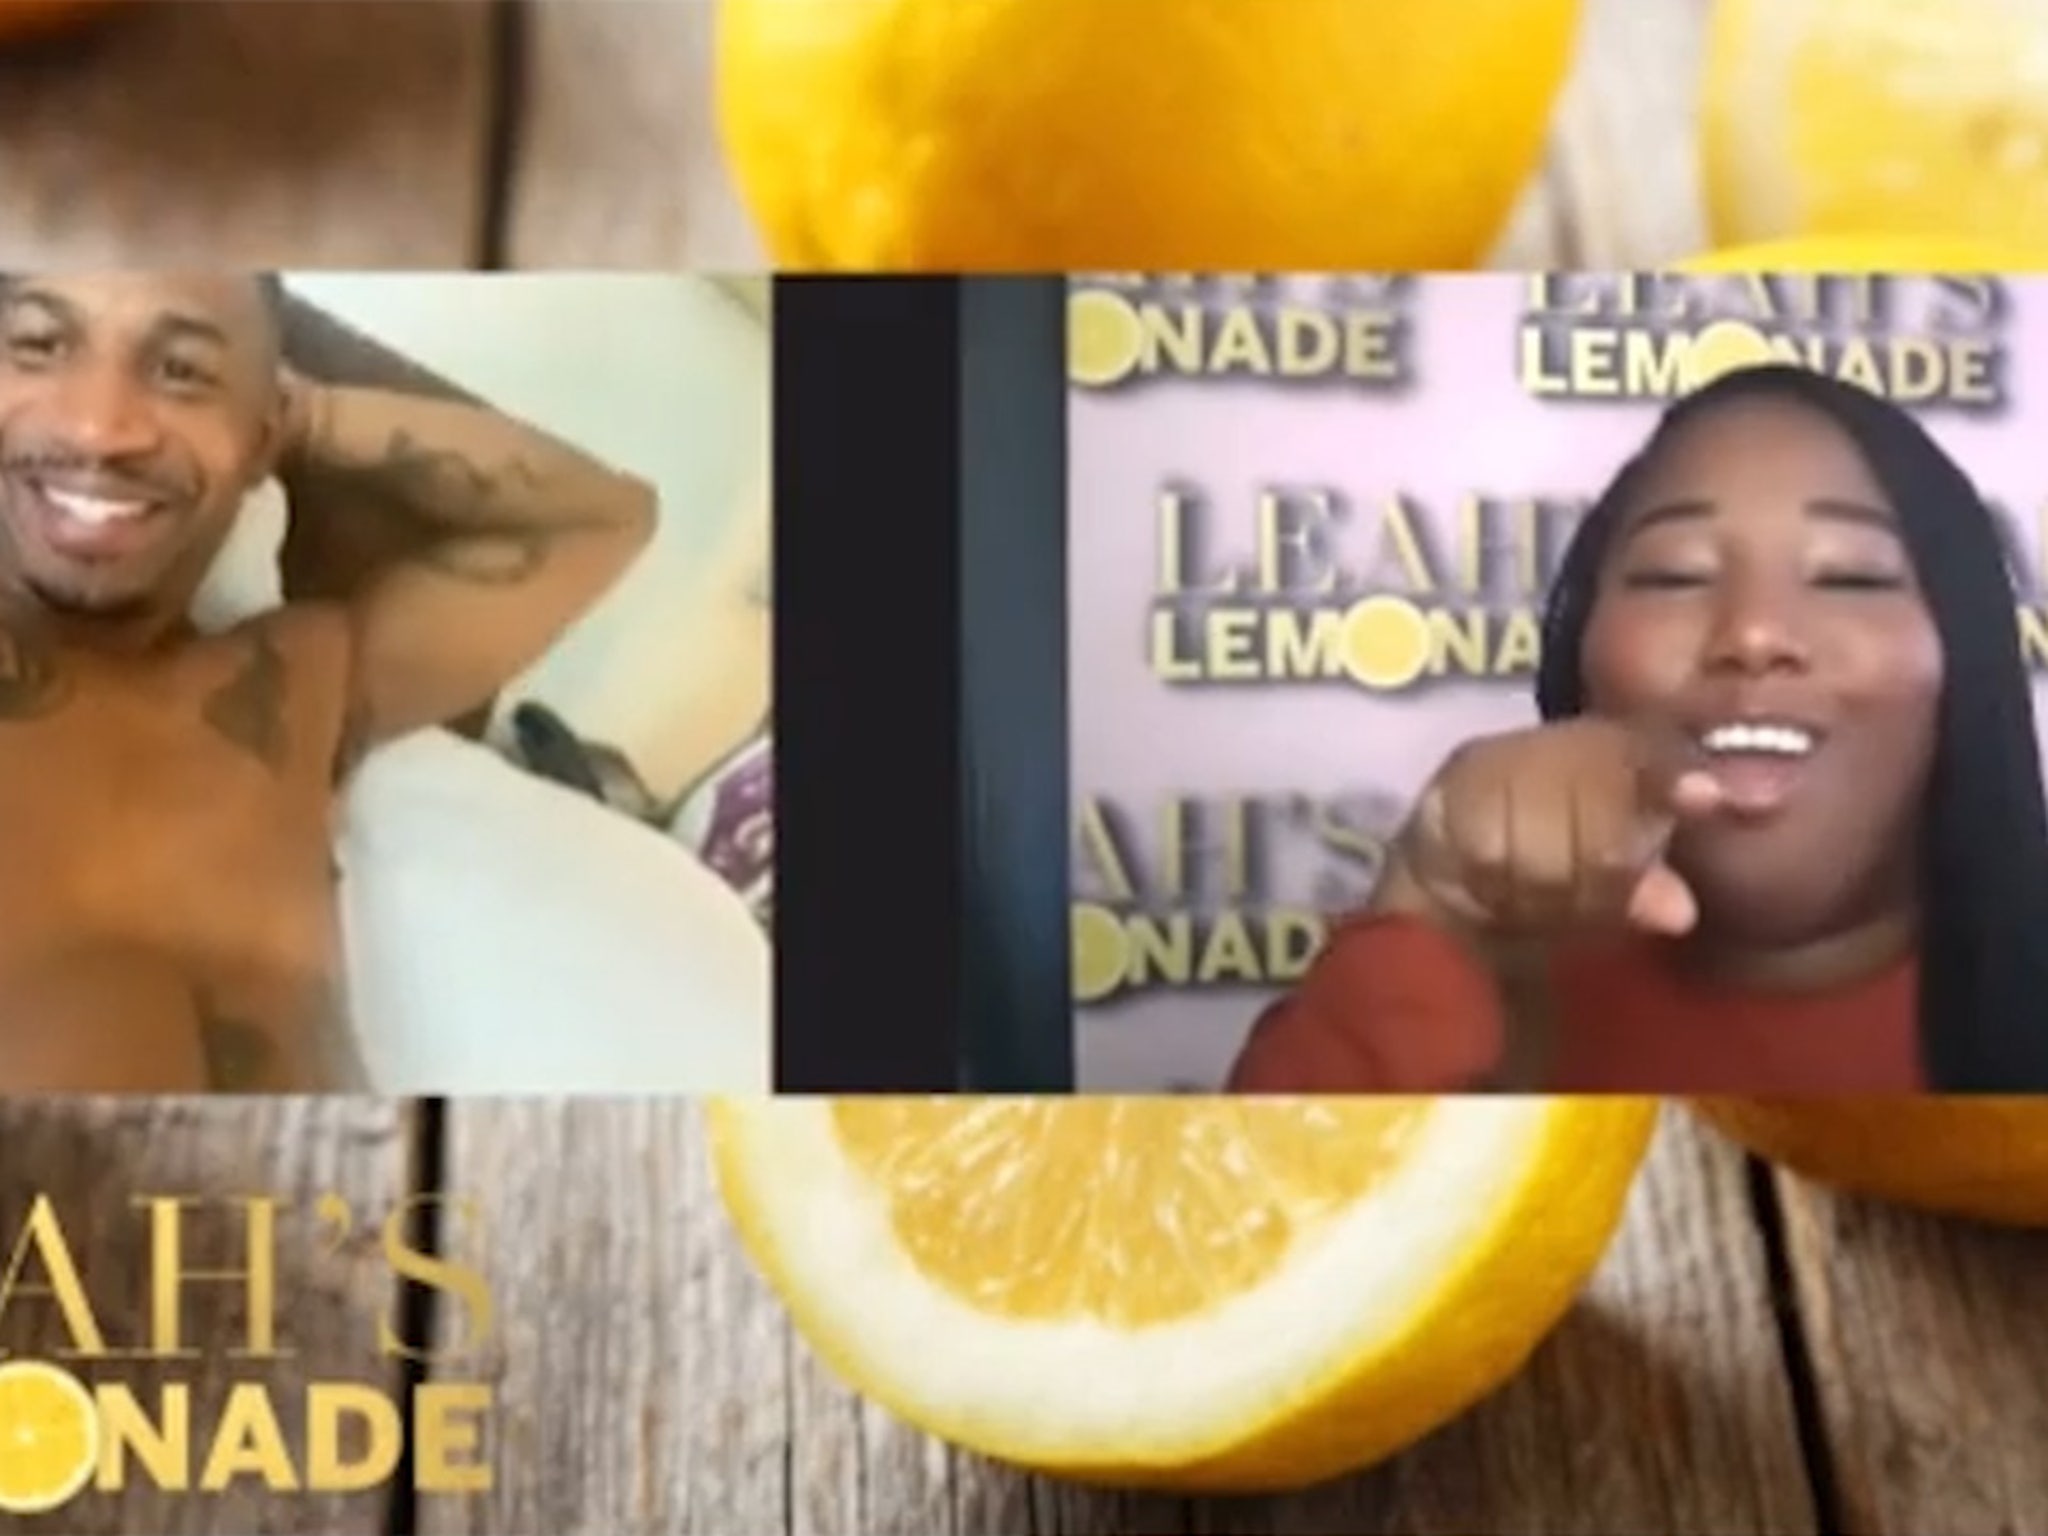 Stevie J Appears to Be Receiving Oral Sex During FaceTime Interview